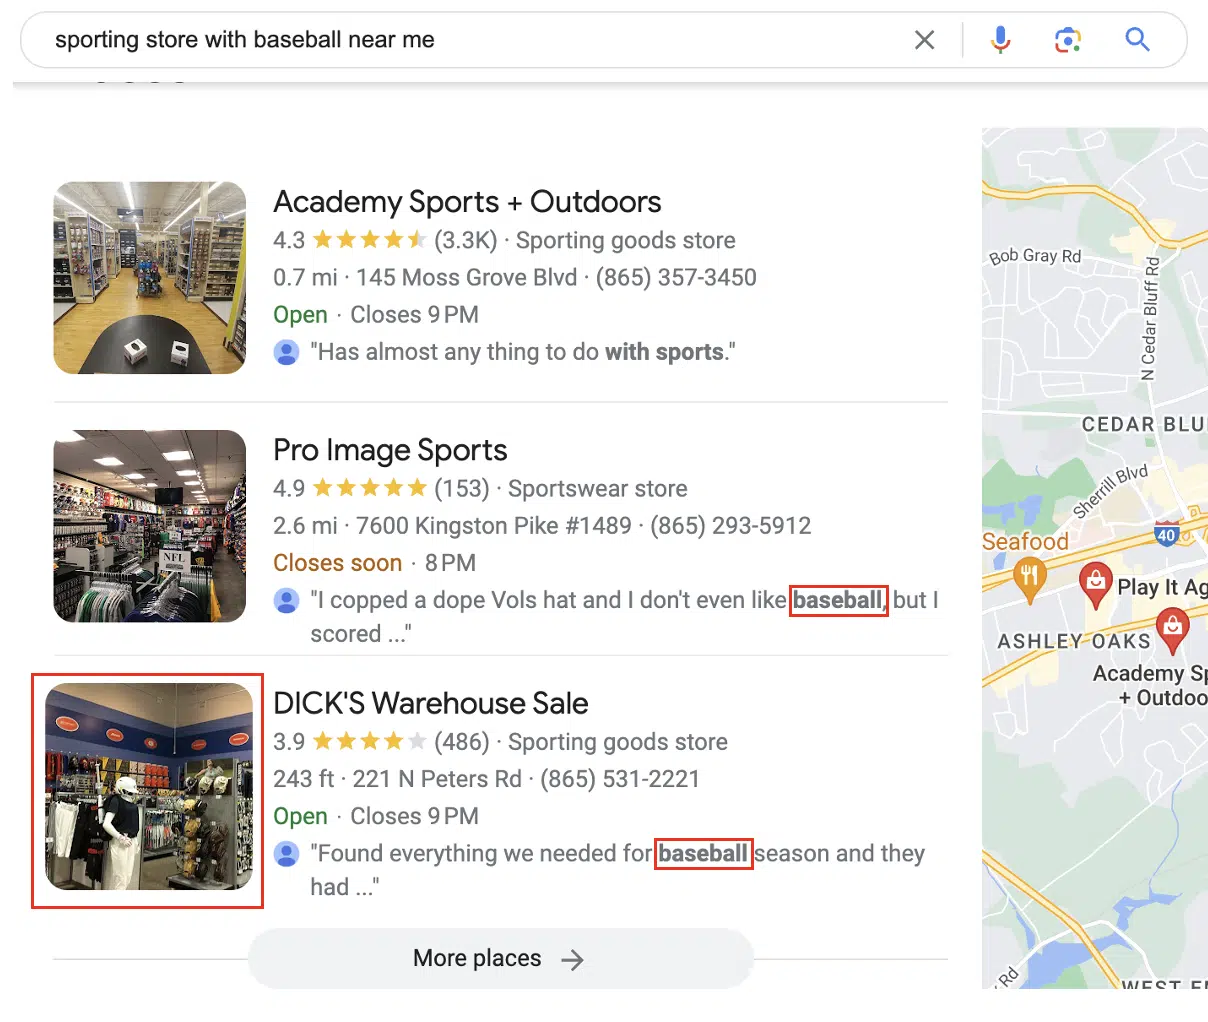 Sporting store with baseball near me